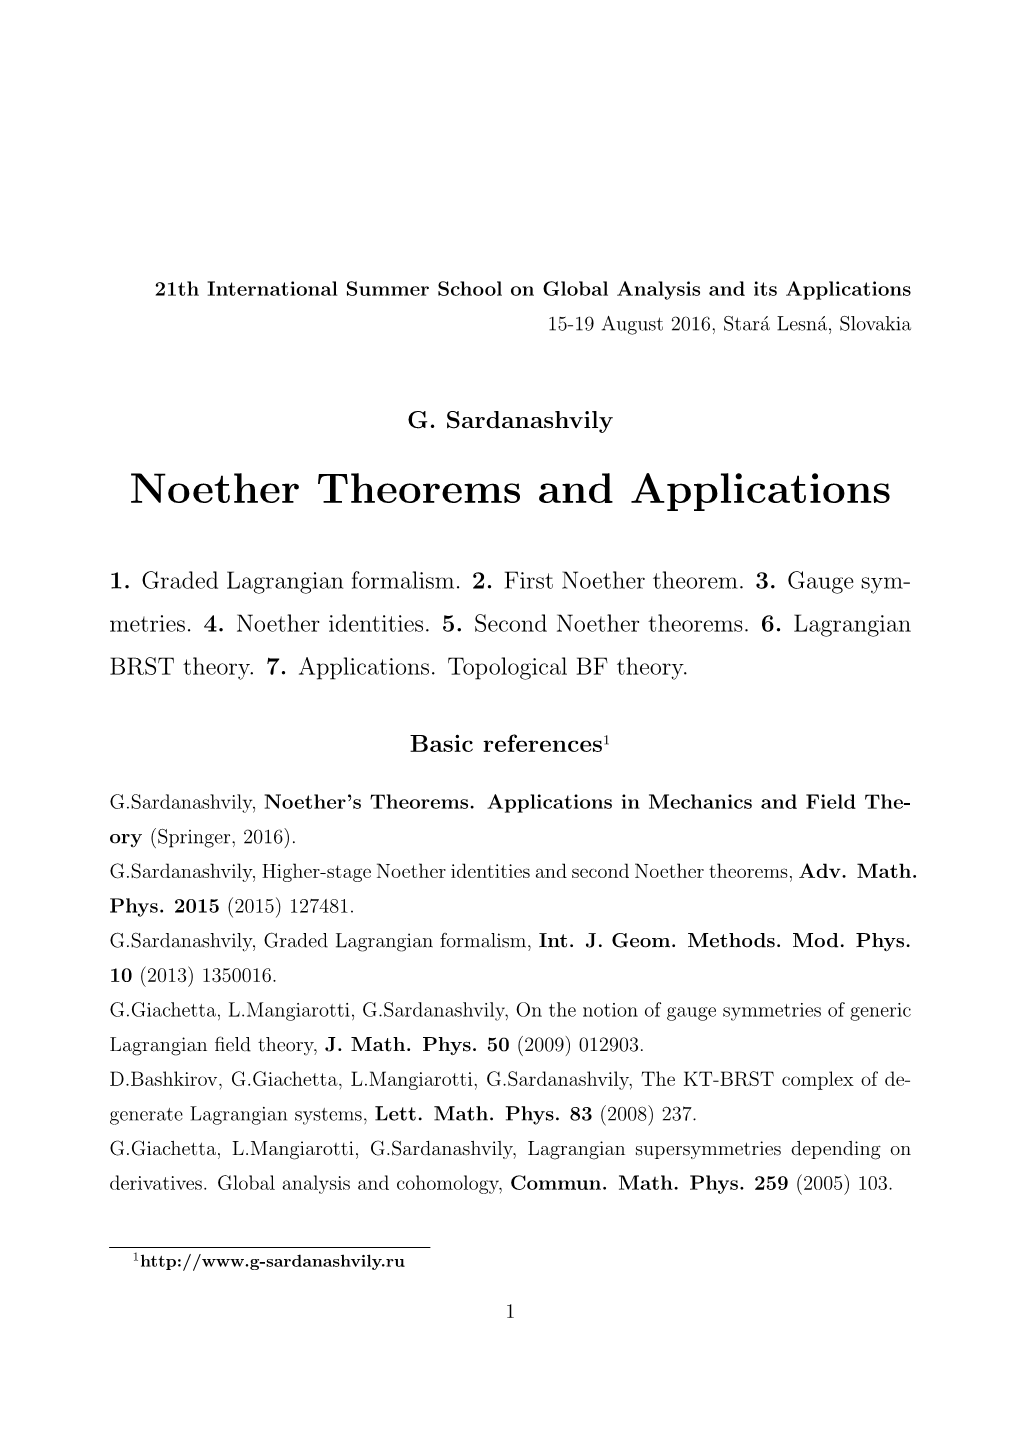 Noether Theorems and Applications